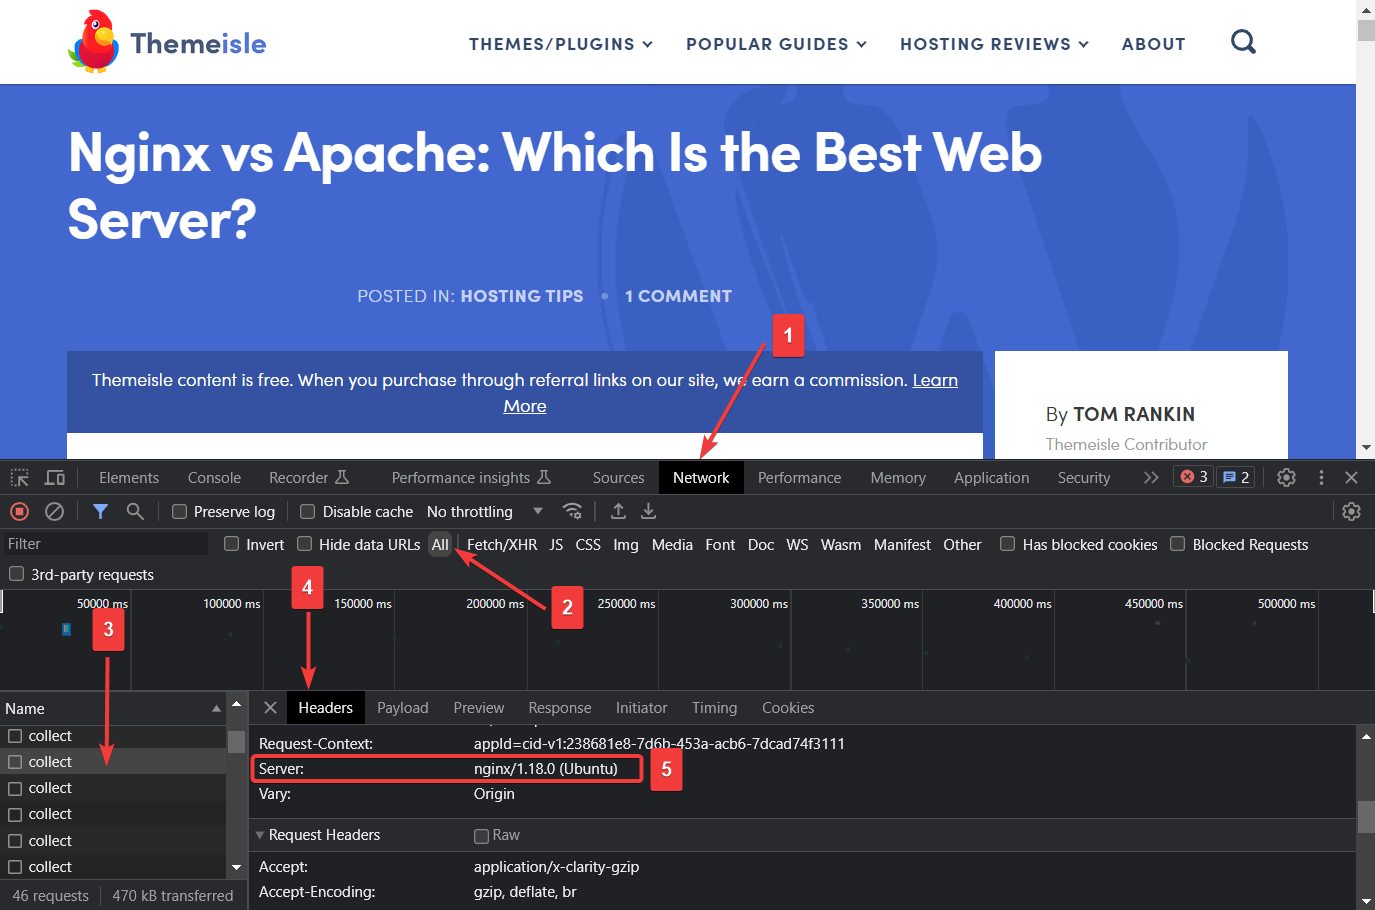 Find if your site is using NGINX or Apache.